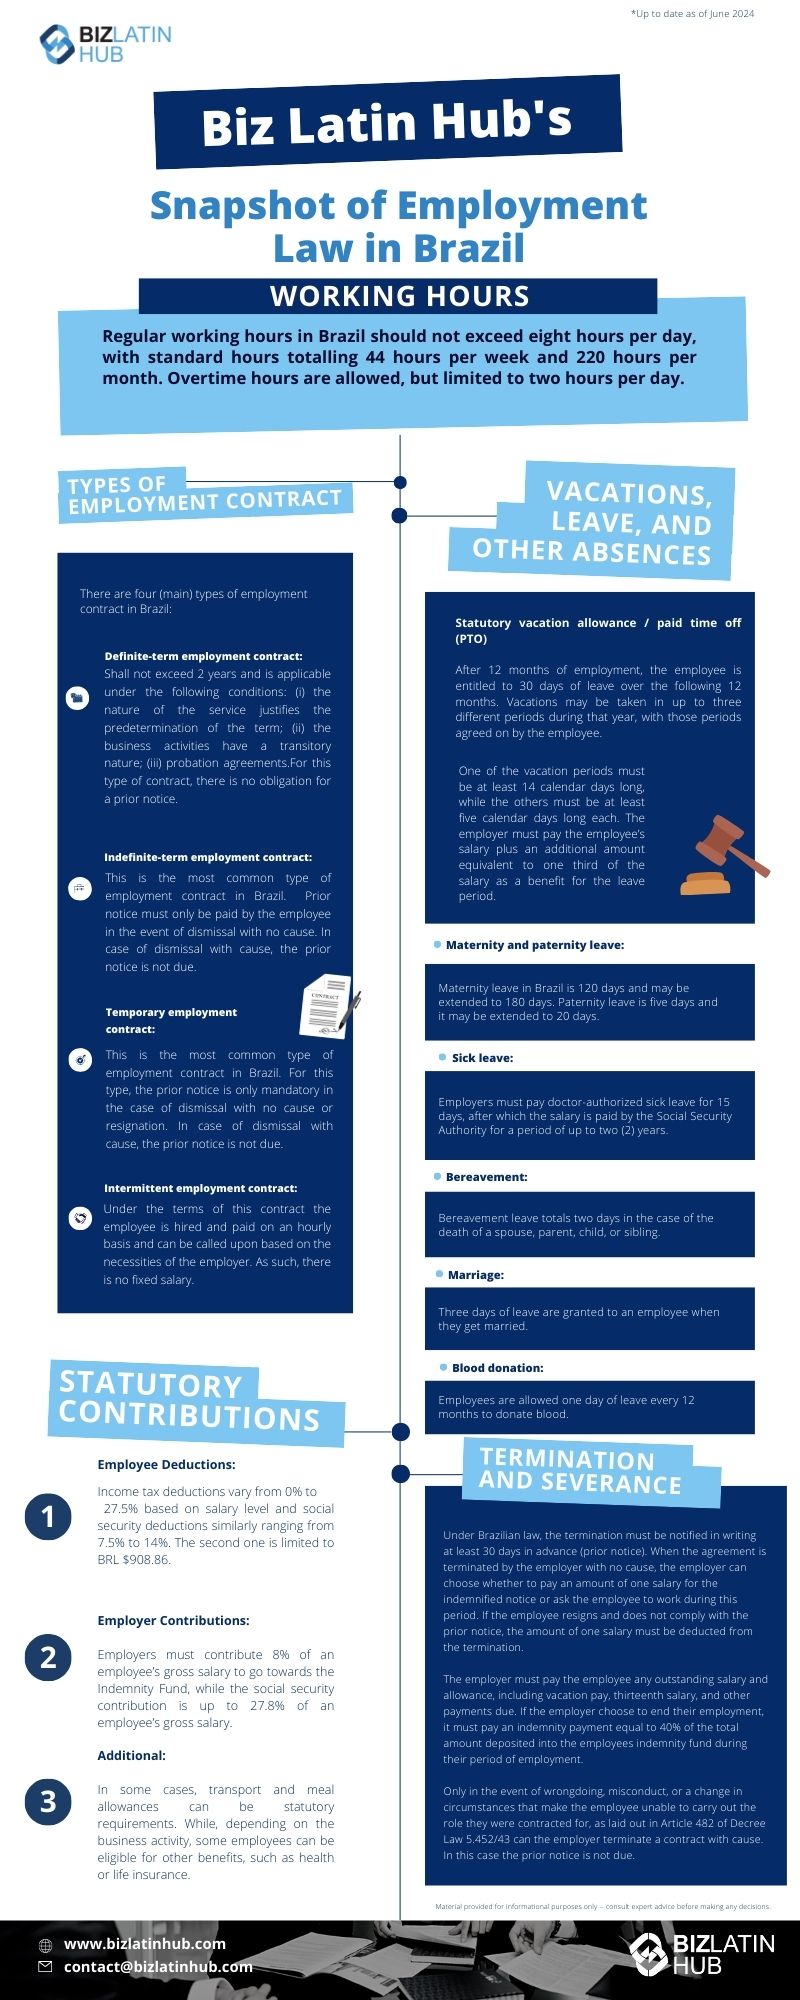 Infographic titled "Biz Latin Hub's Snapshot of Employment Law in Brazil." It covers working hours, types of employment contracts, vacations, statutory contributions, and termination/severance. Blue and white color scheme with text and illustrative graphics throughout.